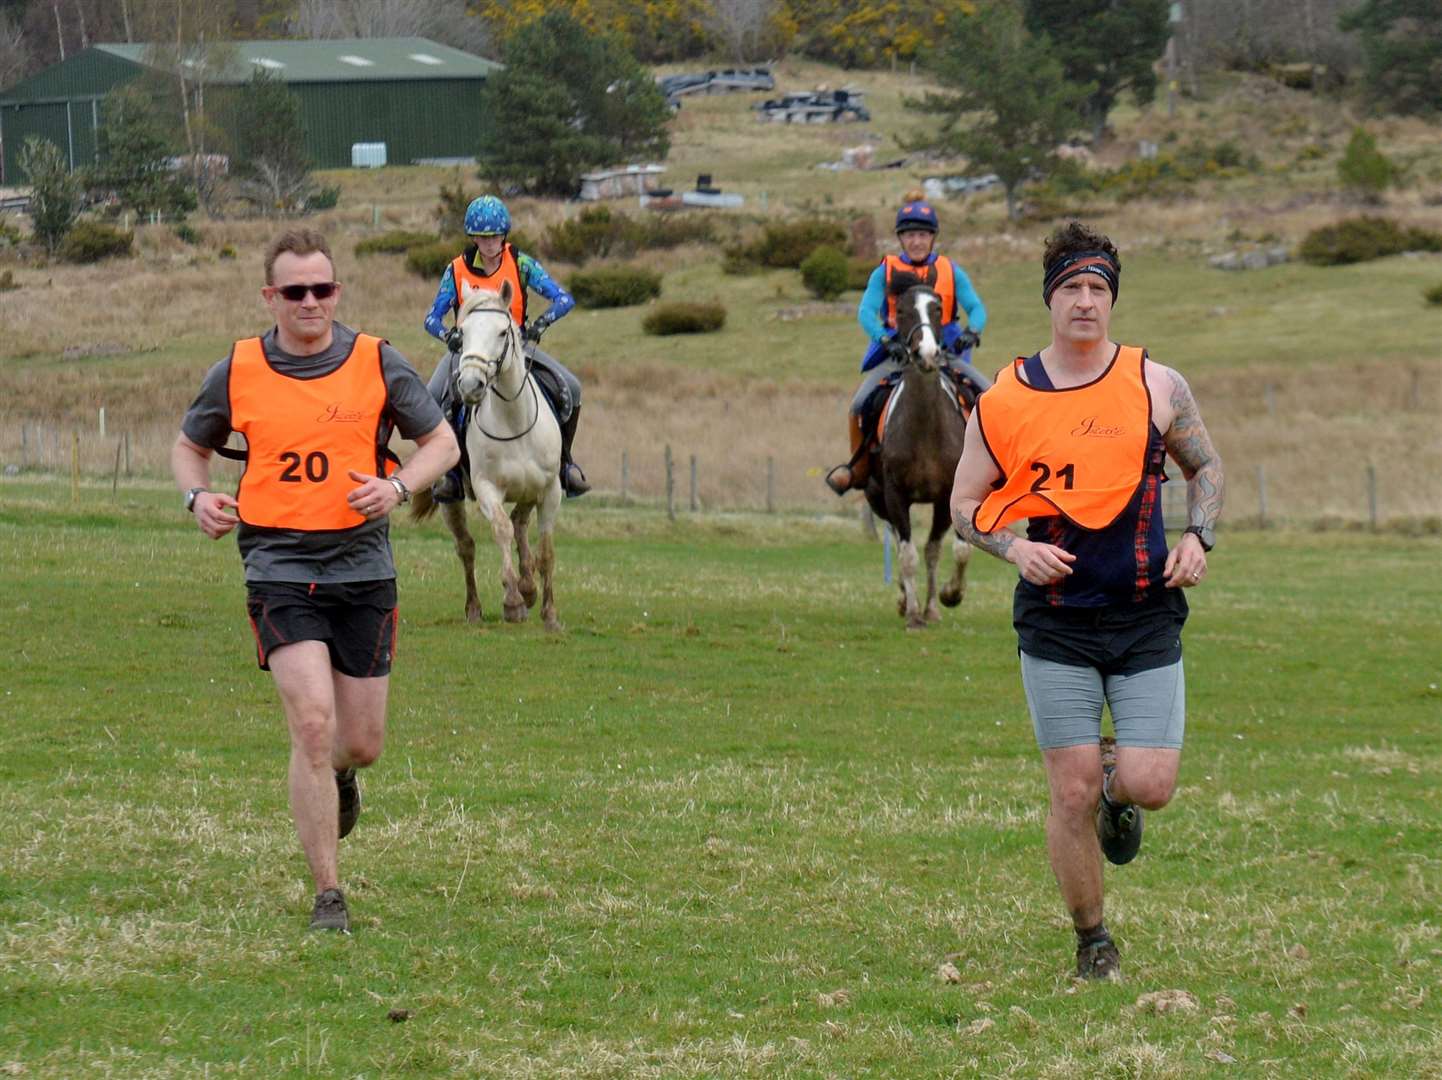 Euan Gorrie and Mark Robb push to the finish with fast closing Charlotte Pumphrey on Eve and Raine Ross on Anika.